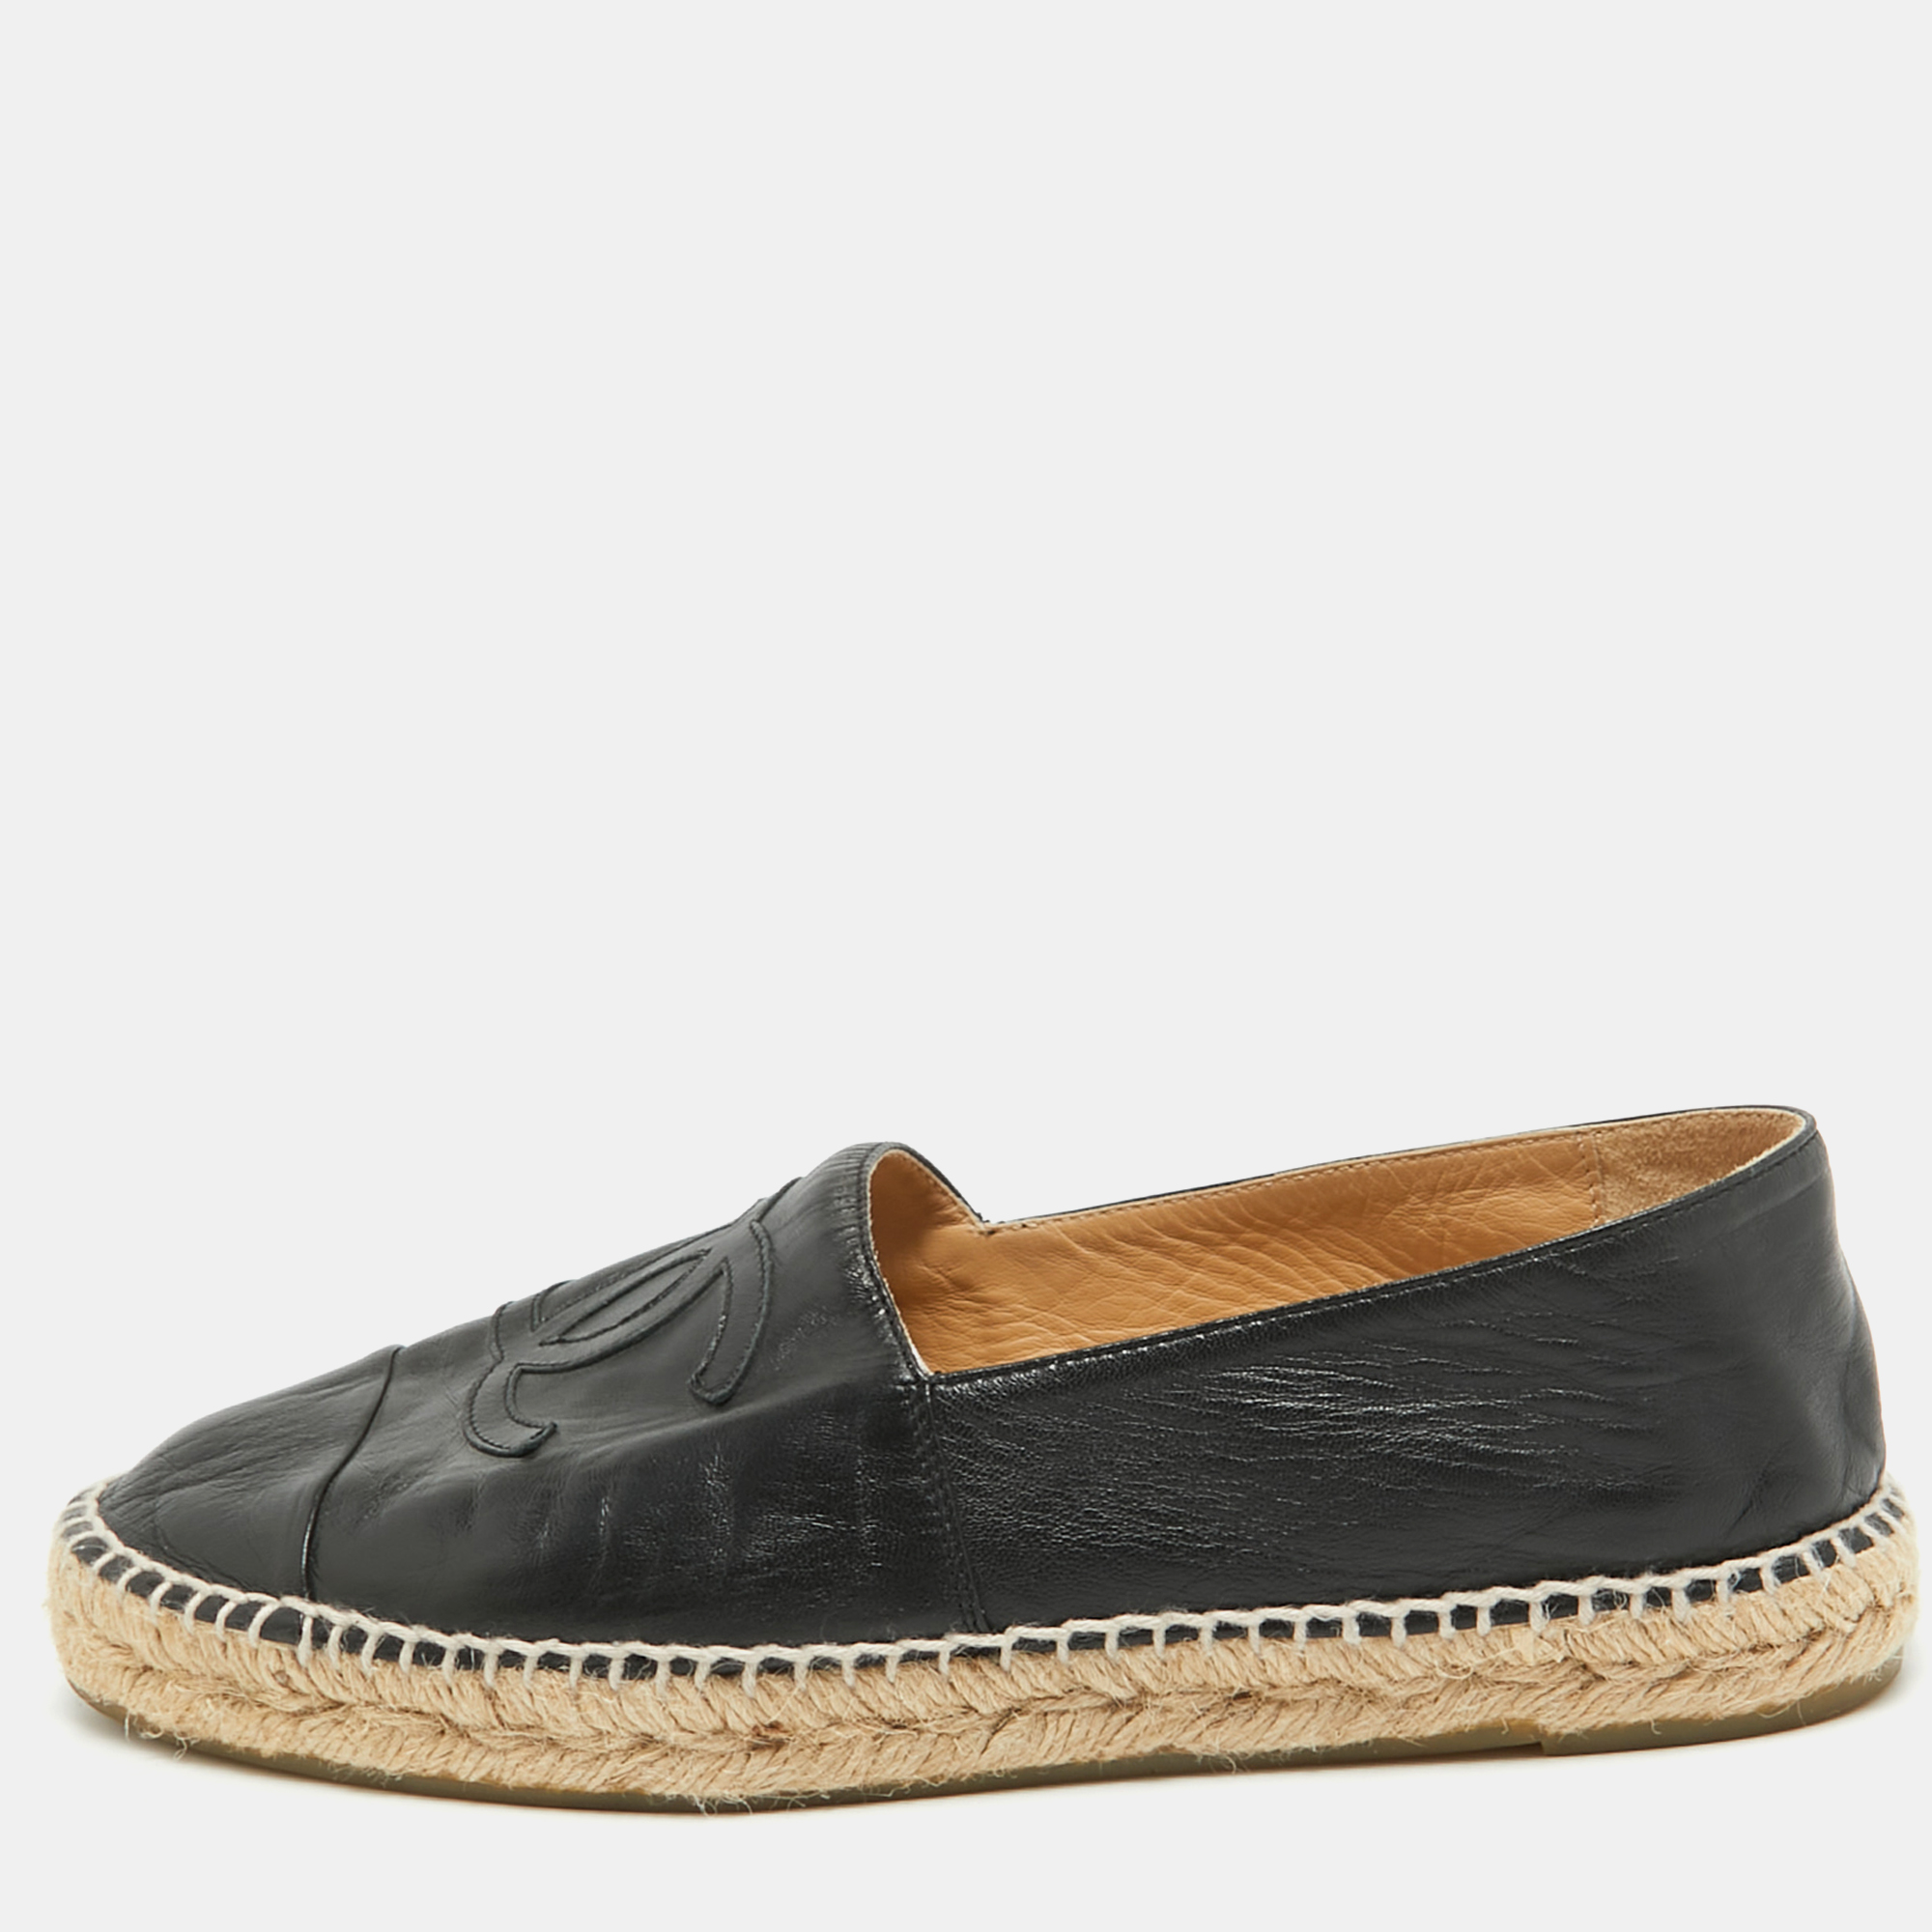 Pre-owned Chanel Black Leather Cc Espadrille Flats Size 41